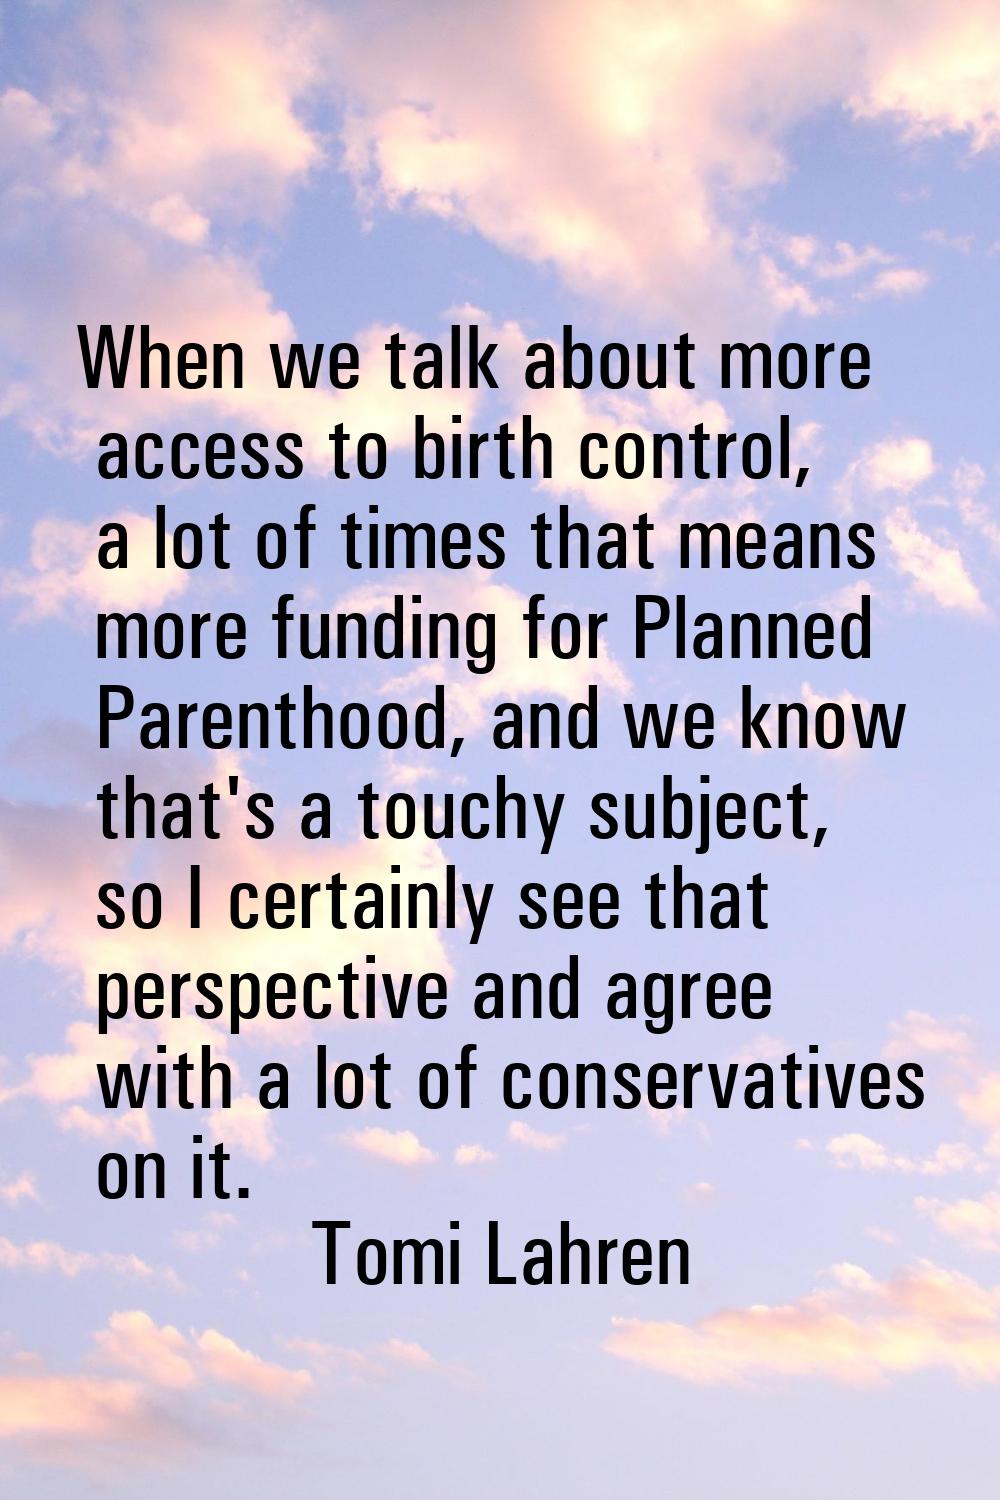 When we talk about more access to birth control, a lot of times that means more funding for Planned